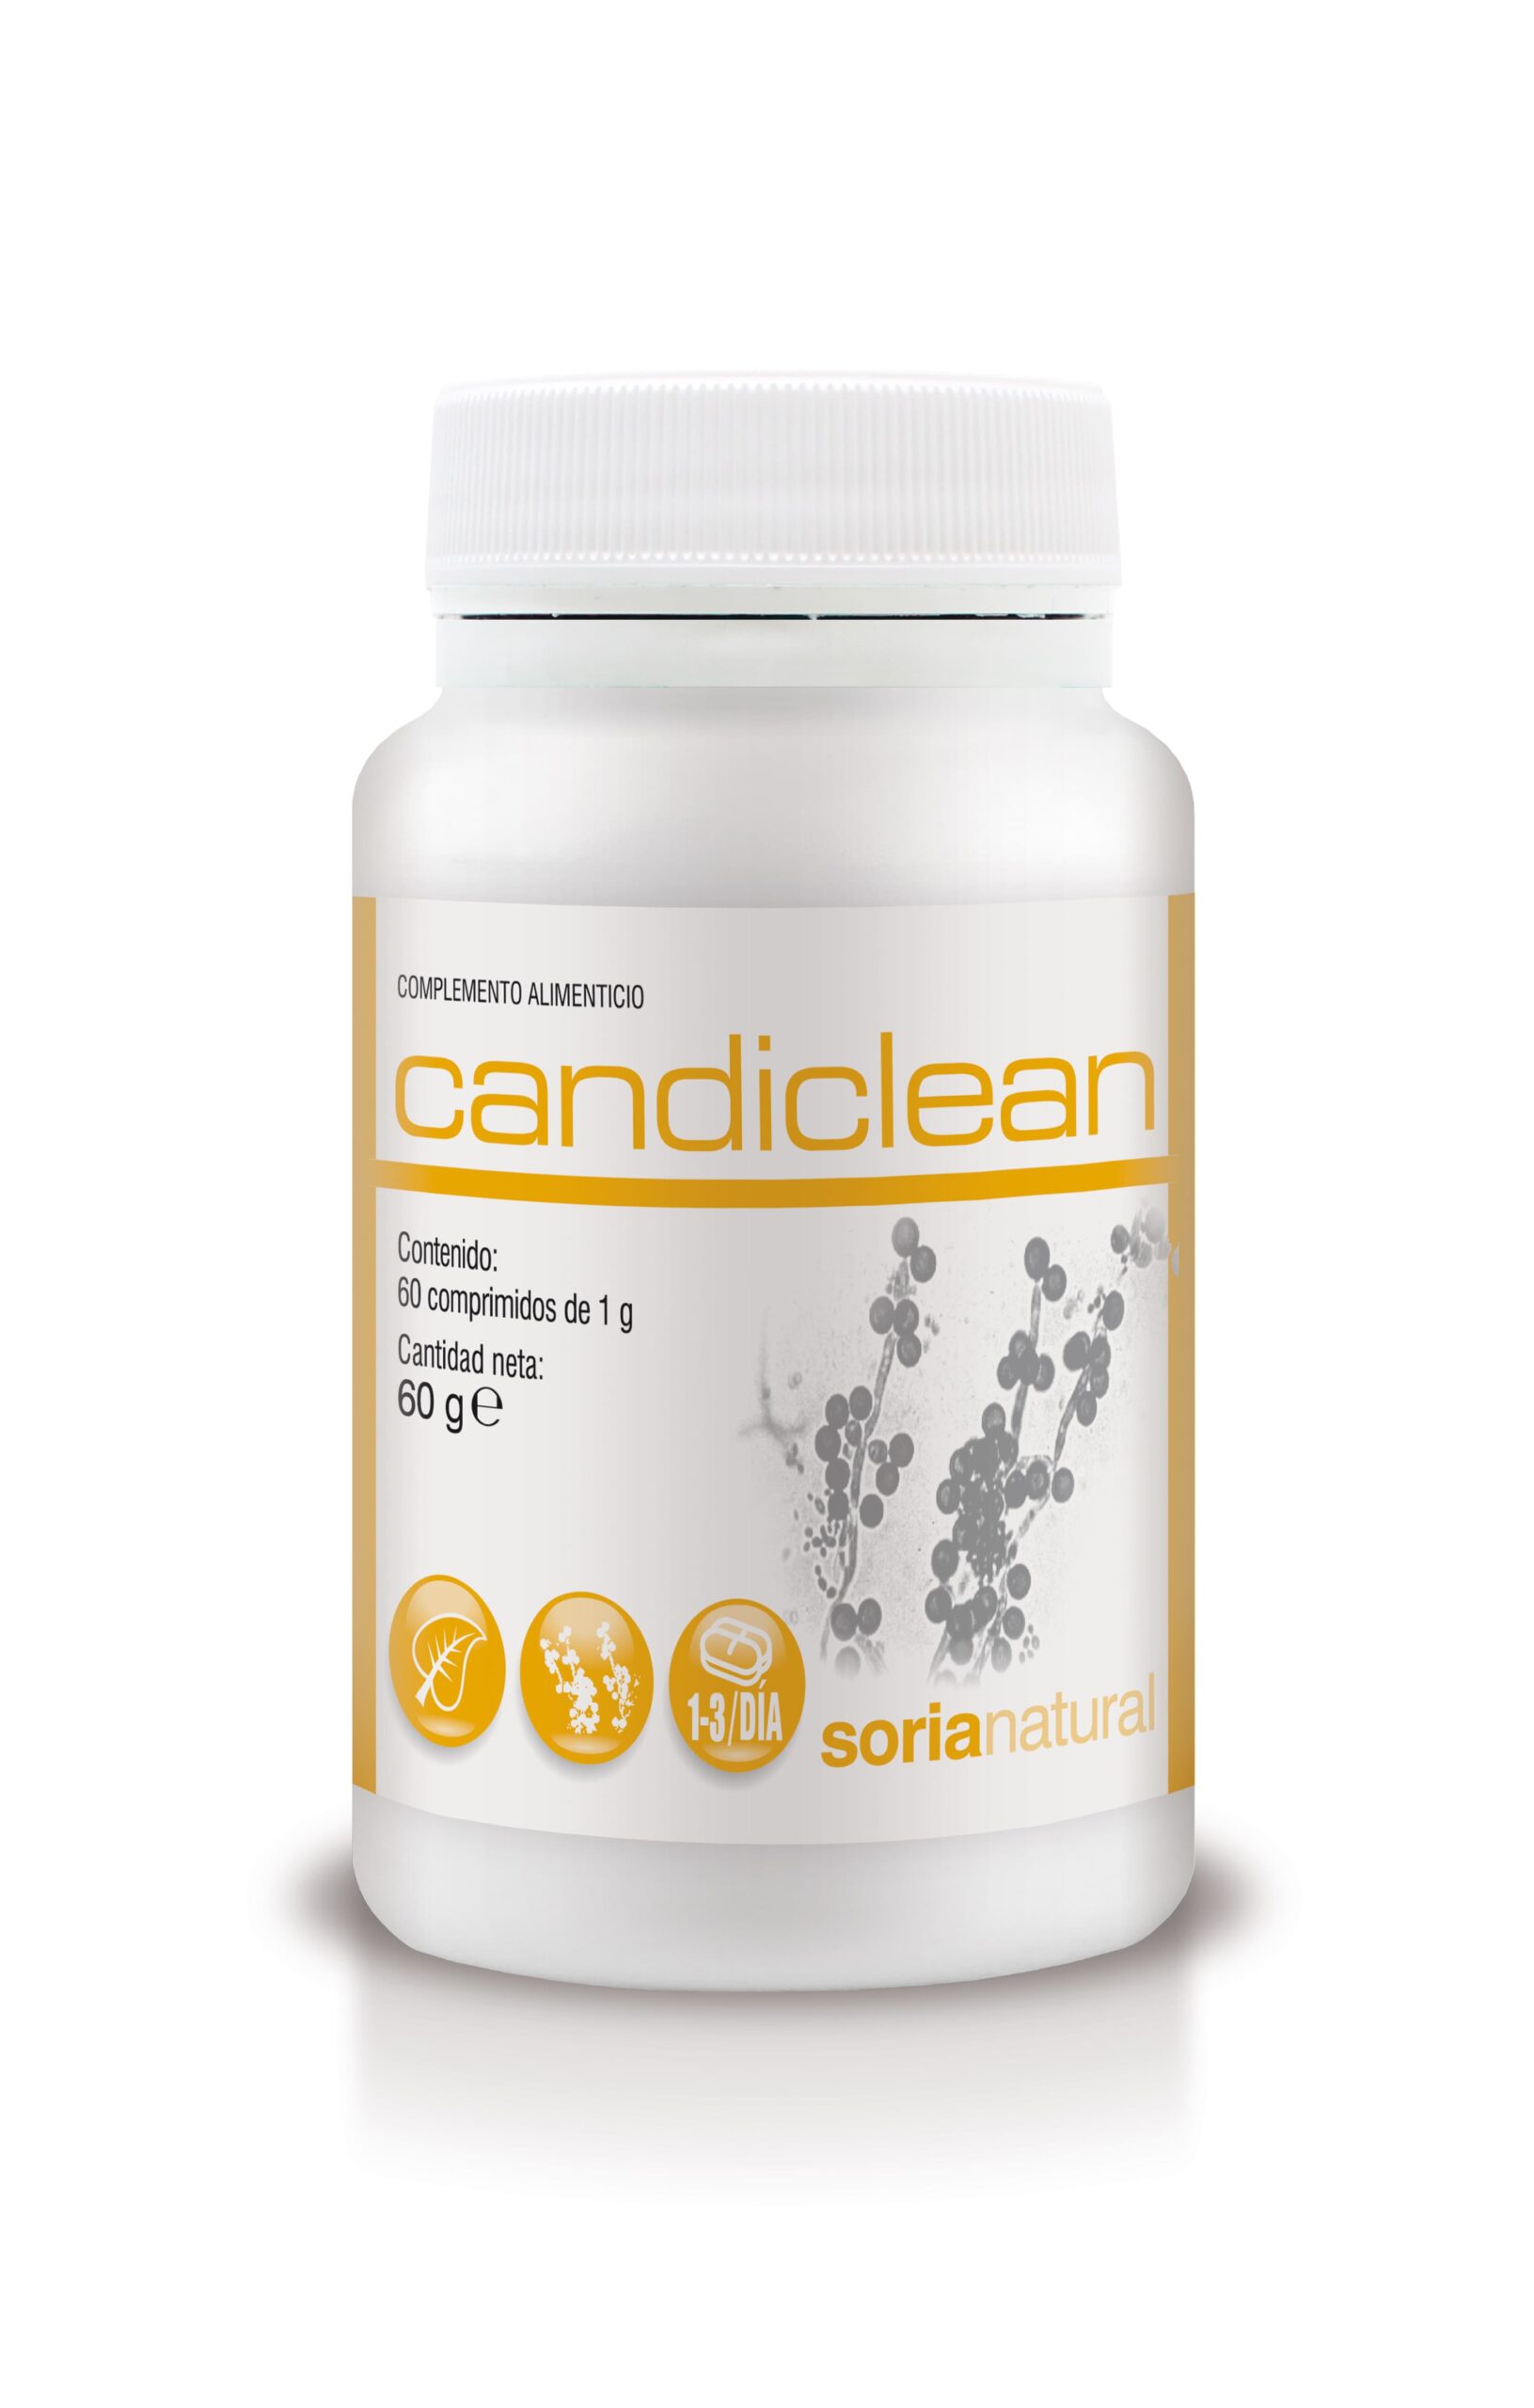 Candiclean tablete 60 tablet